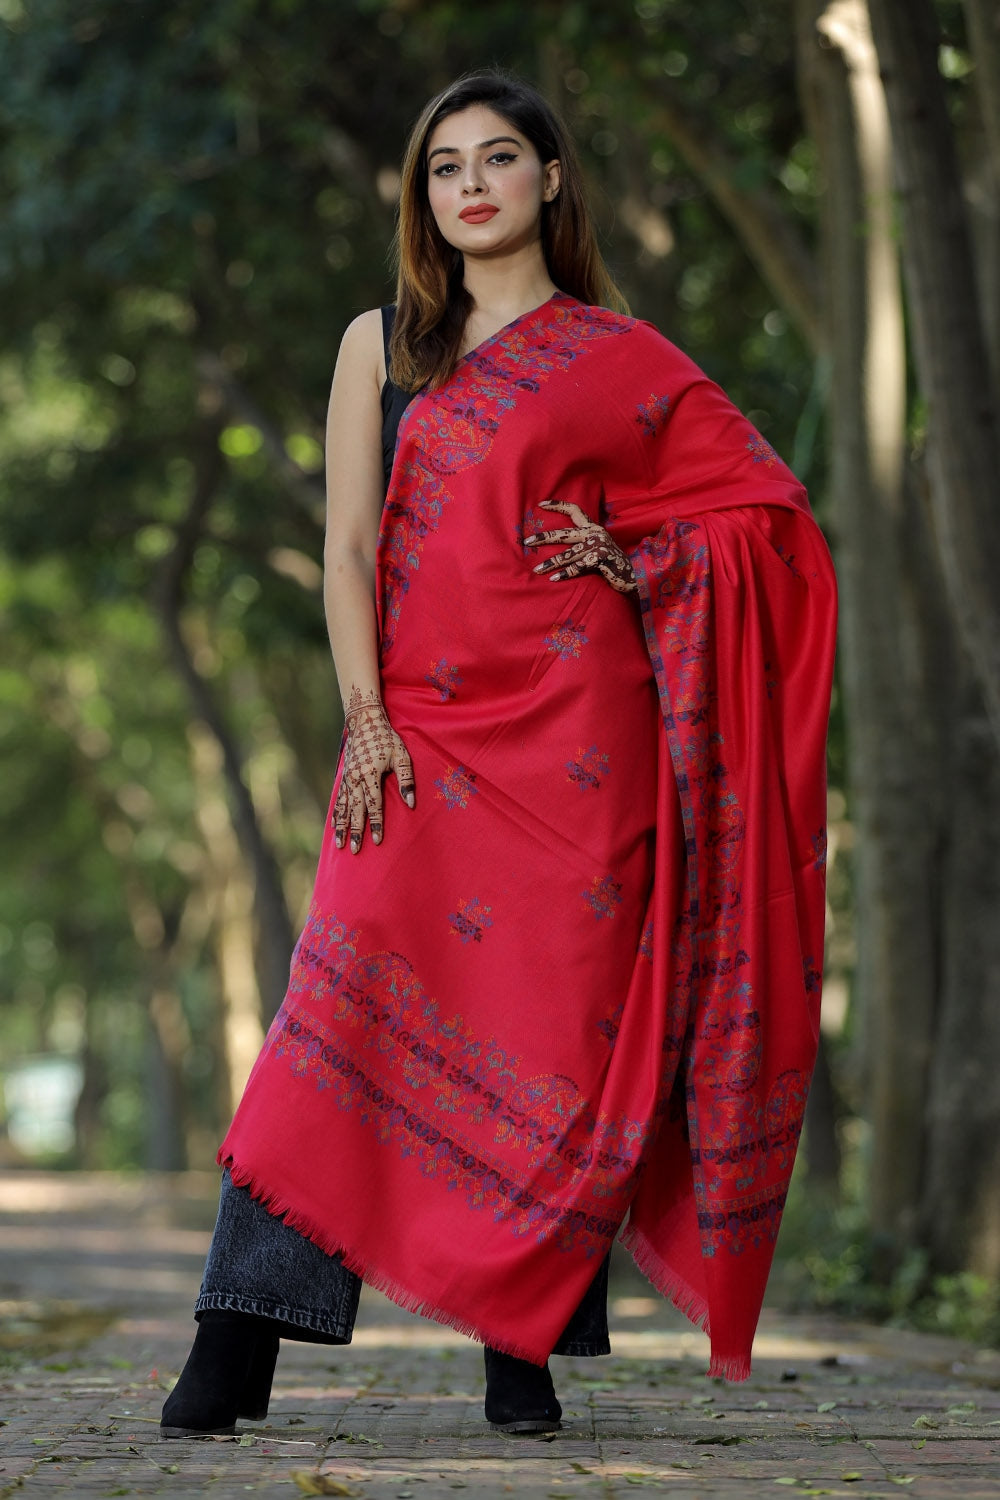 RED COLOUR SHAWL WITH ZARI & KANI WORK DEFINES ROYAL